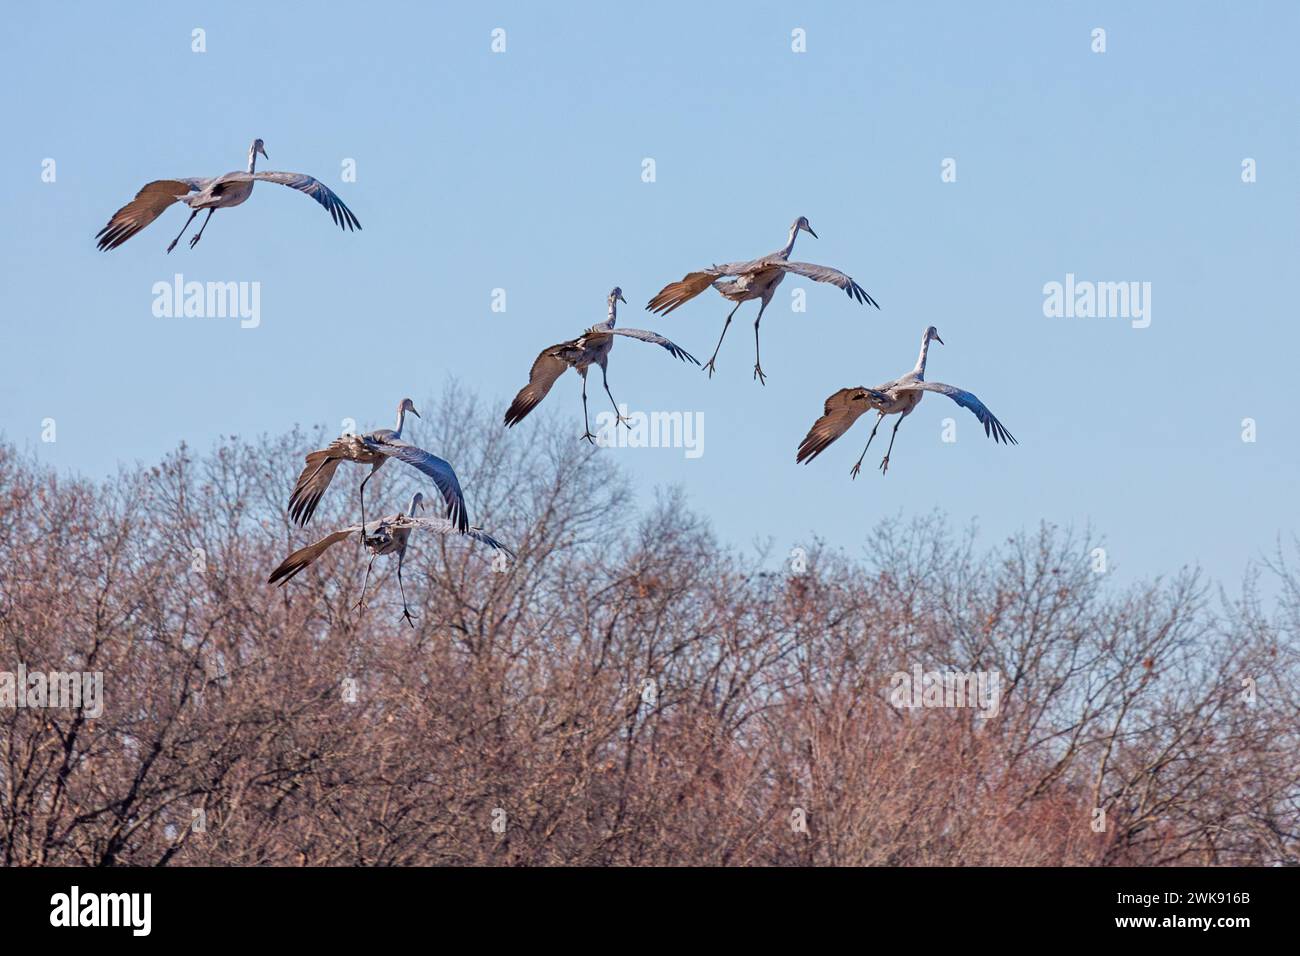 Six sandhill cranes fall from the sky. Above the treetops, their wings are spread as they drift in for a landing. Stock Photo